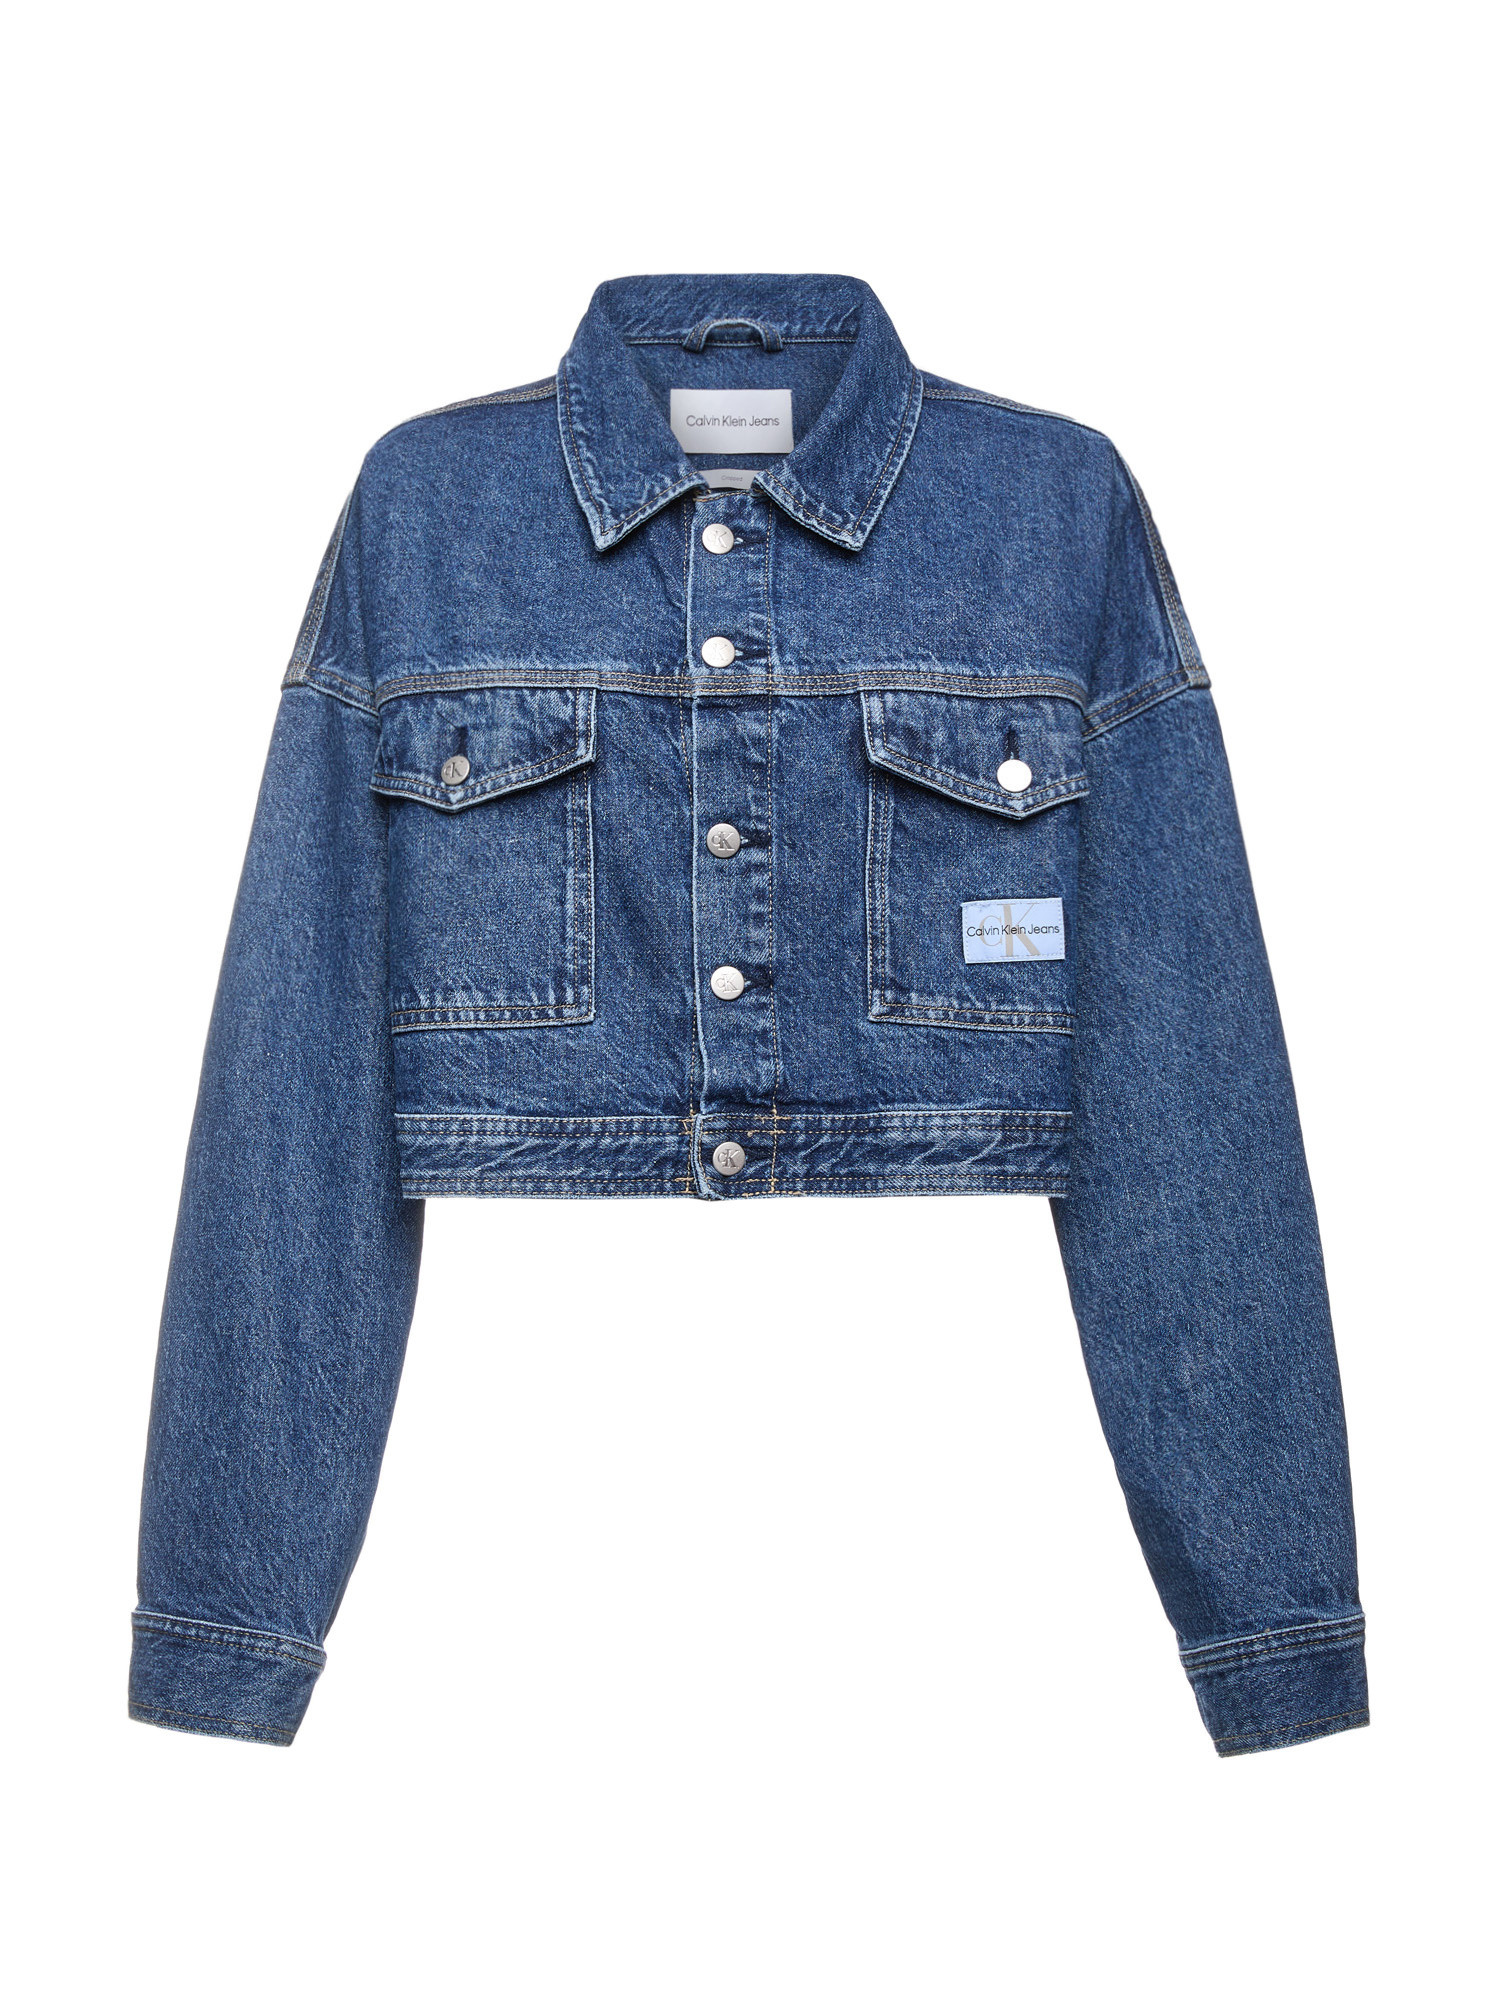 Calvin Klein Jeans - Cropped relaxed-fit jacket in denim, Denim, large image number 0